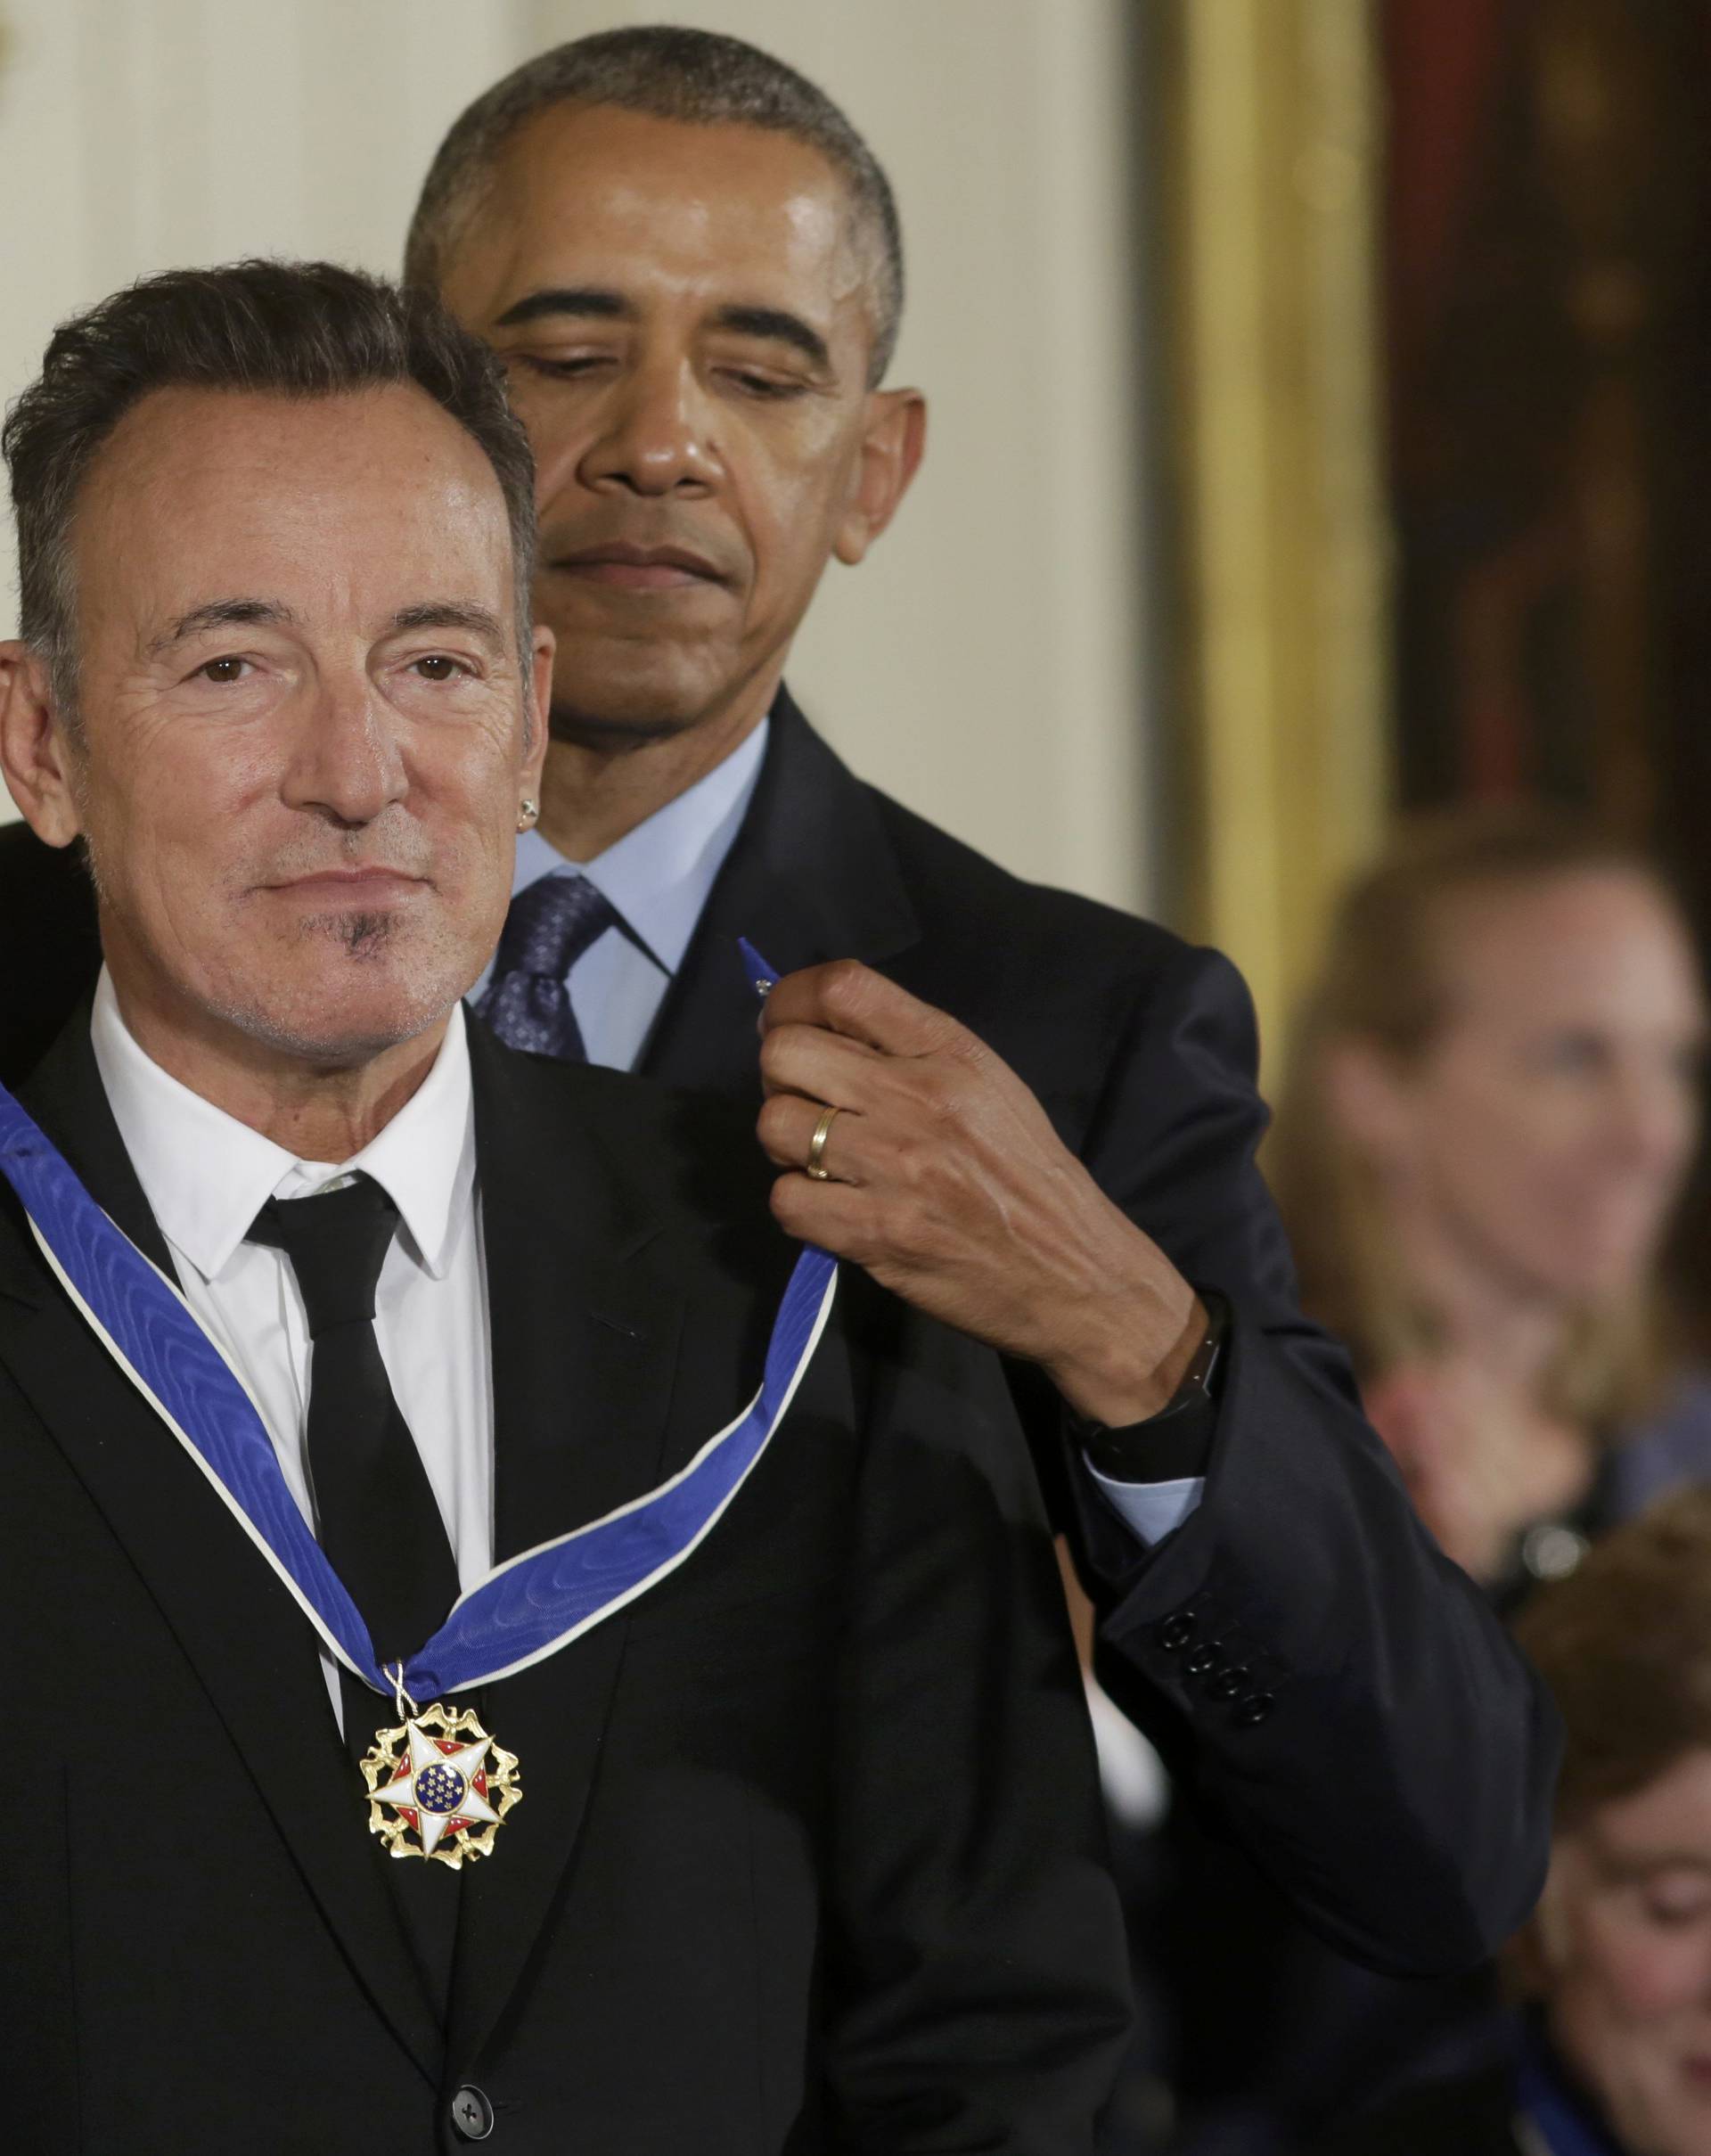 U.S. President Obama presents the Presidential Medal of Freedom to musician Springsteen during ceremony at the White House in Washington